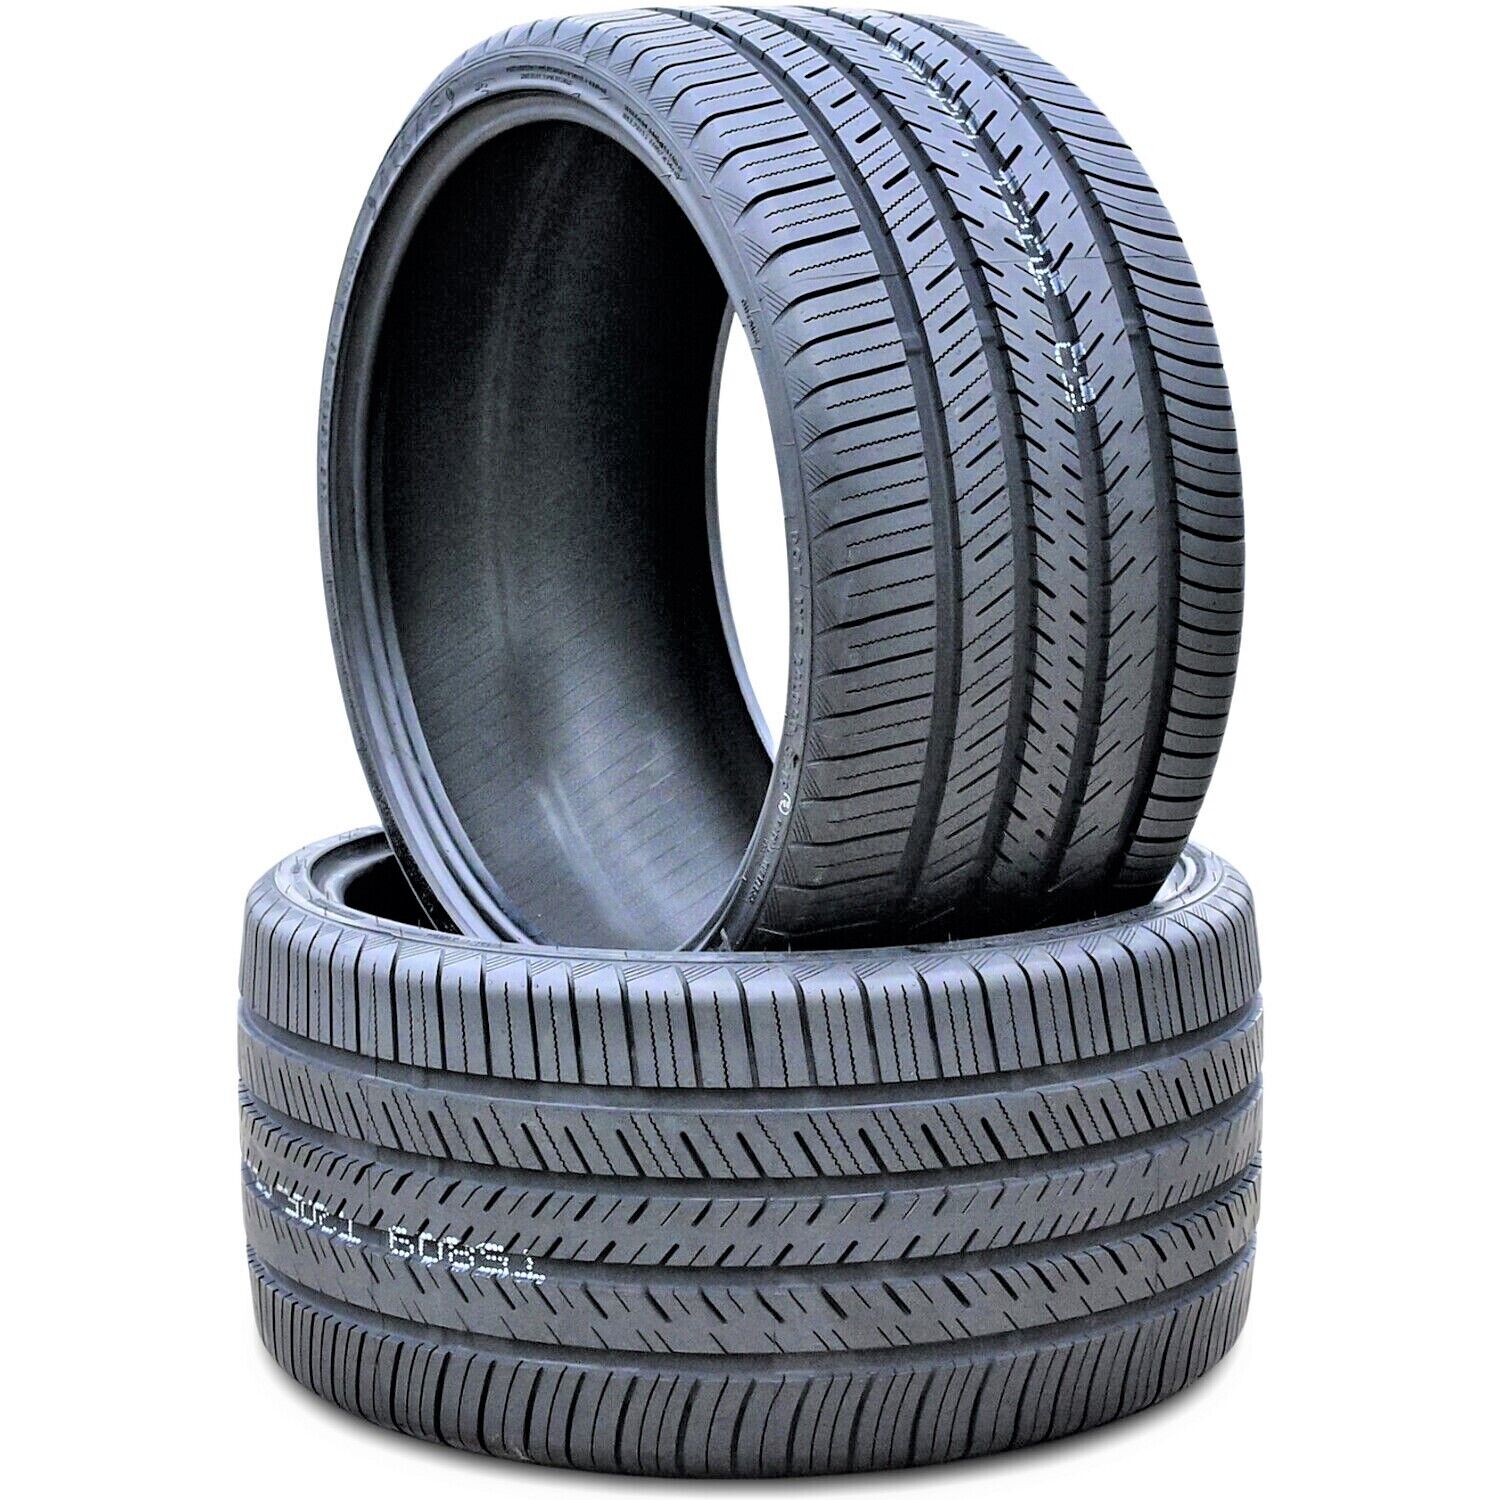 2 Tires Atlas Force UHP 295/25R28 103V XL A/S Performance